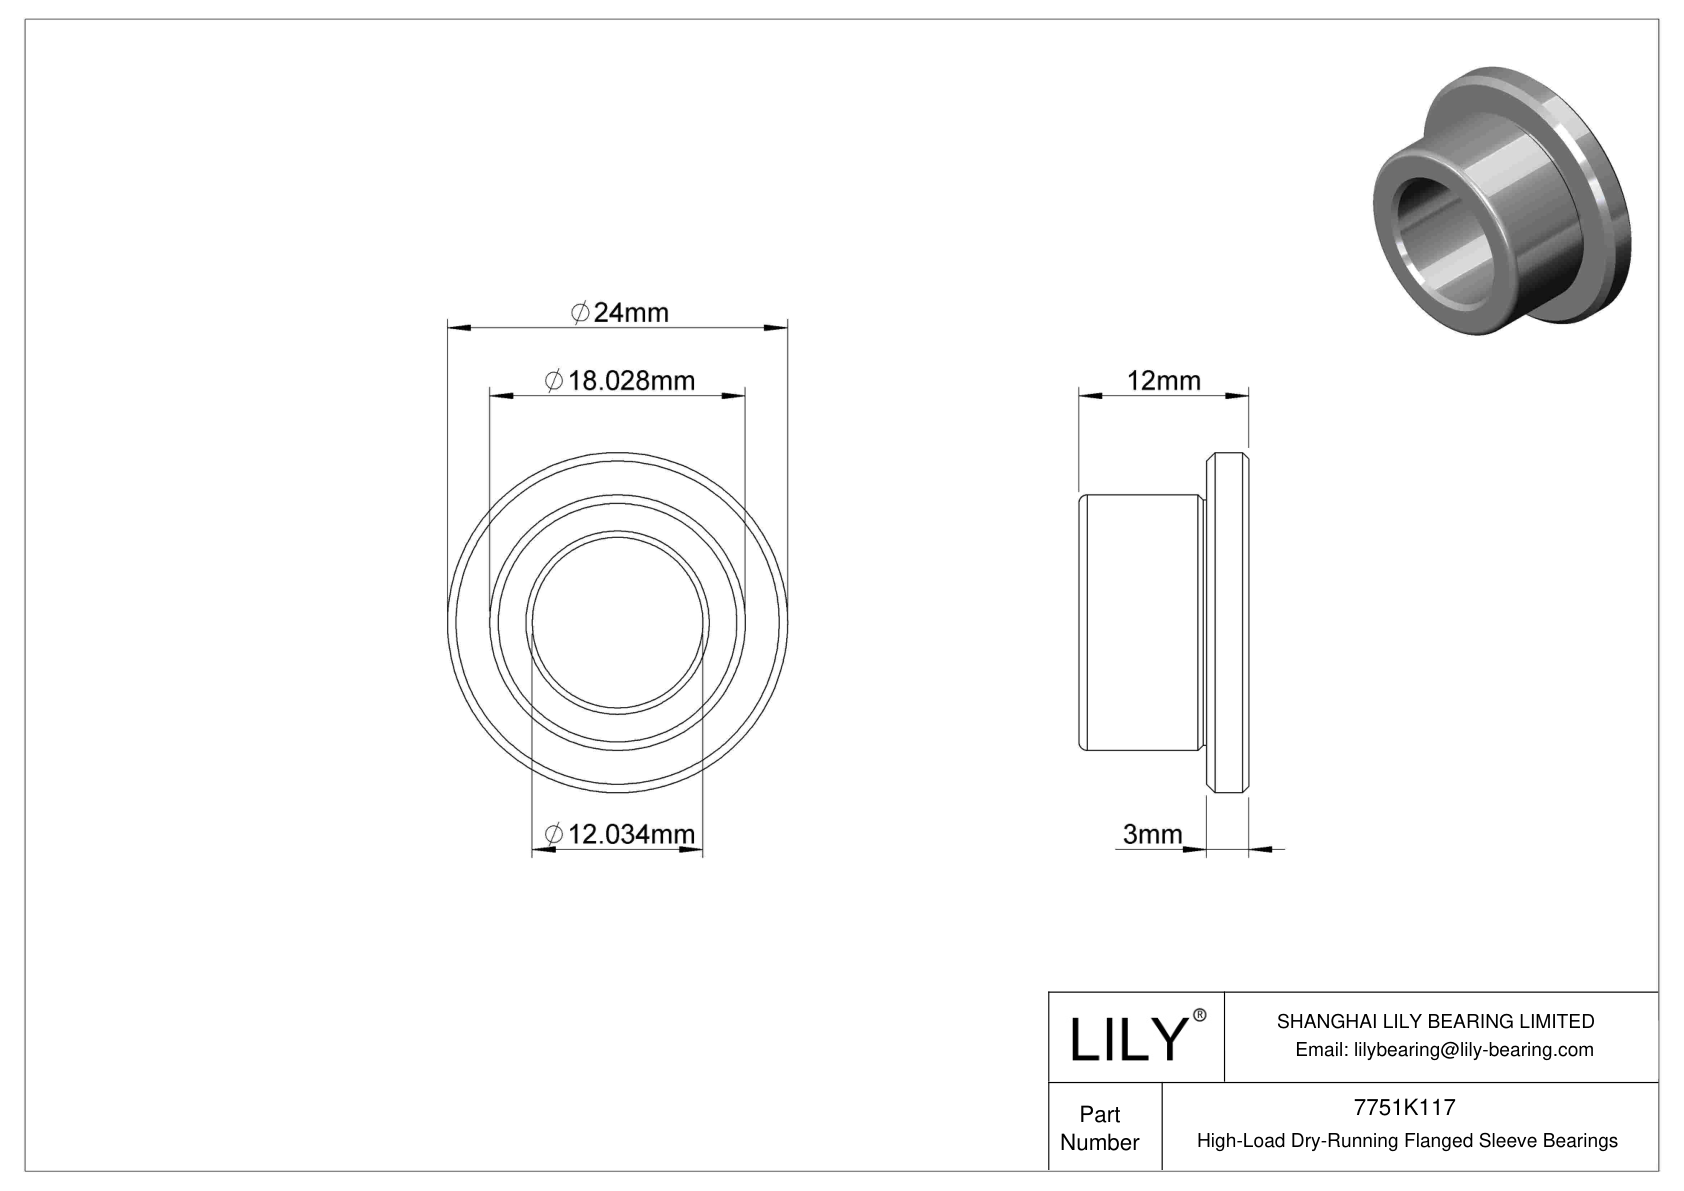 HHFBKBBH High-Load Dry-Running Flanged Sleeve Bearings cad drawing